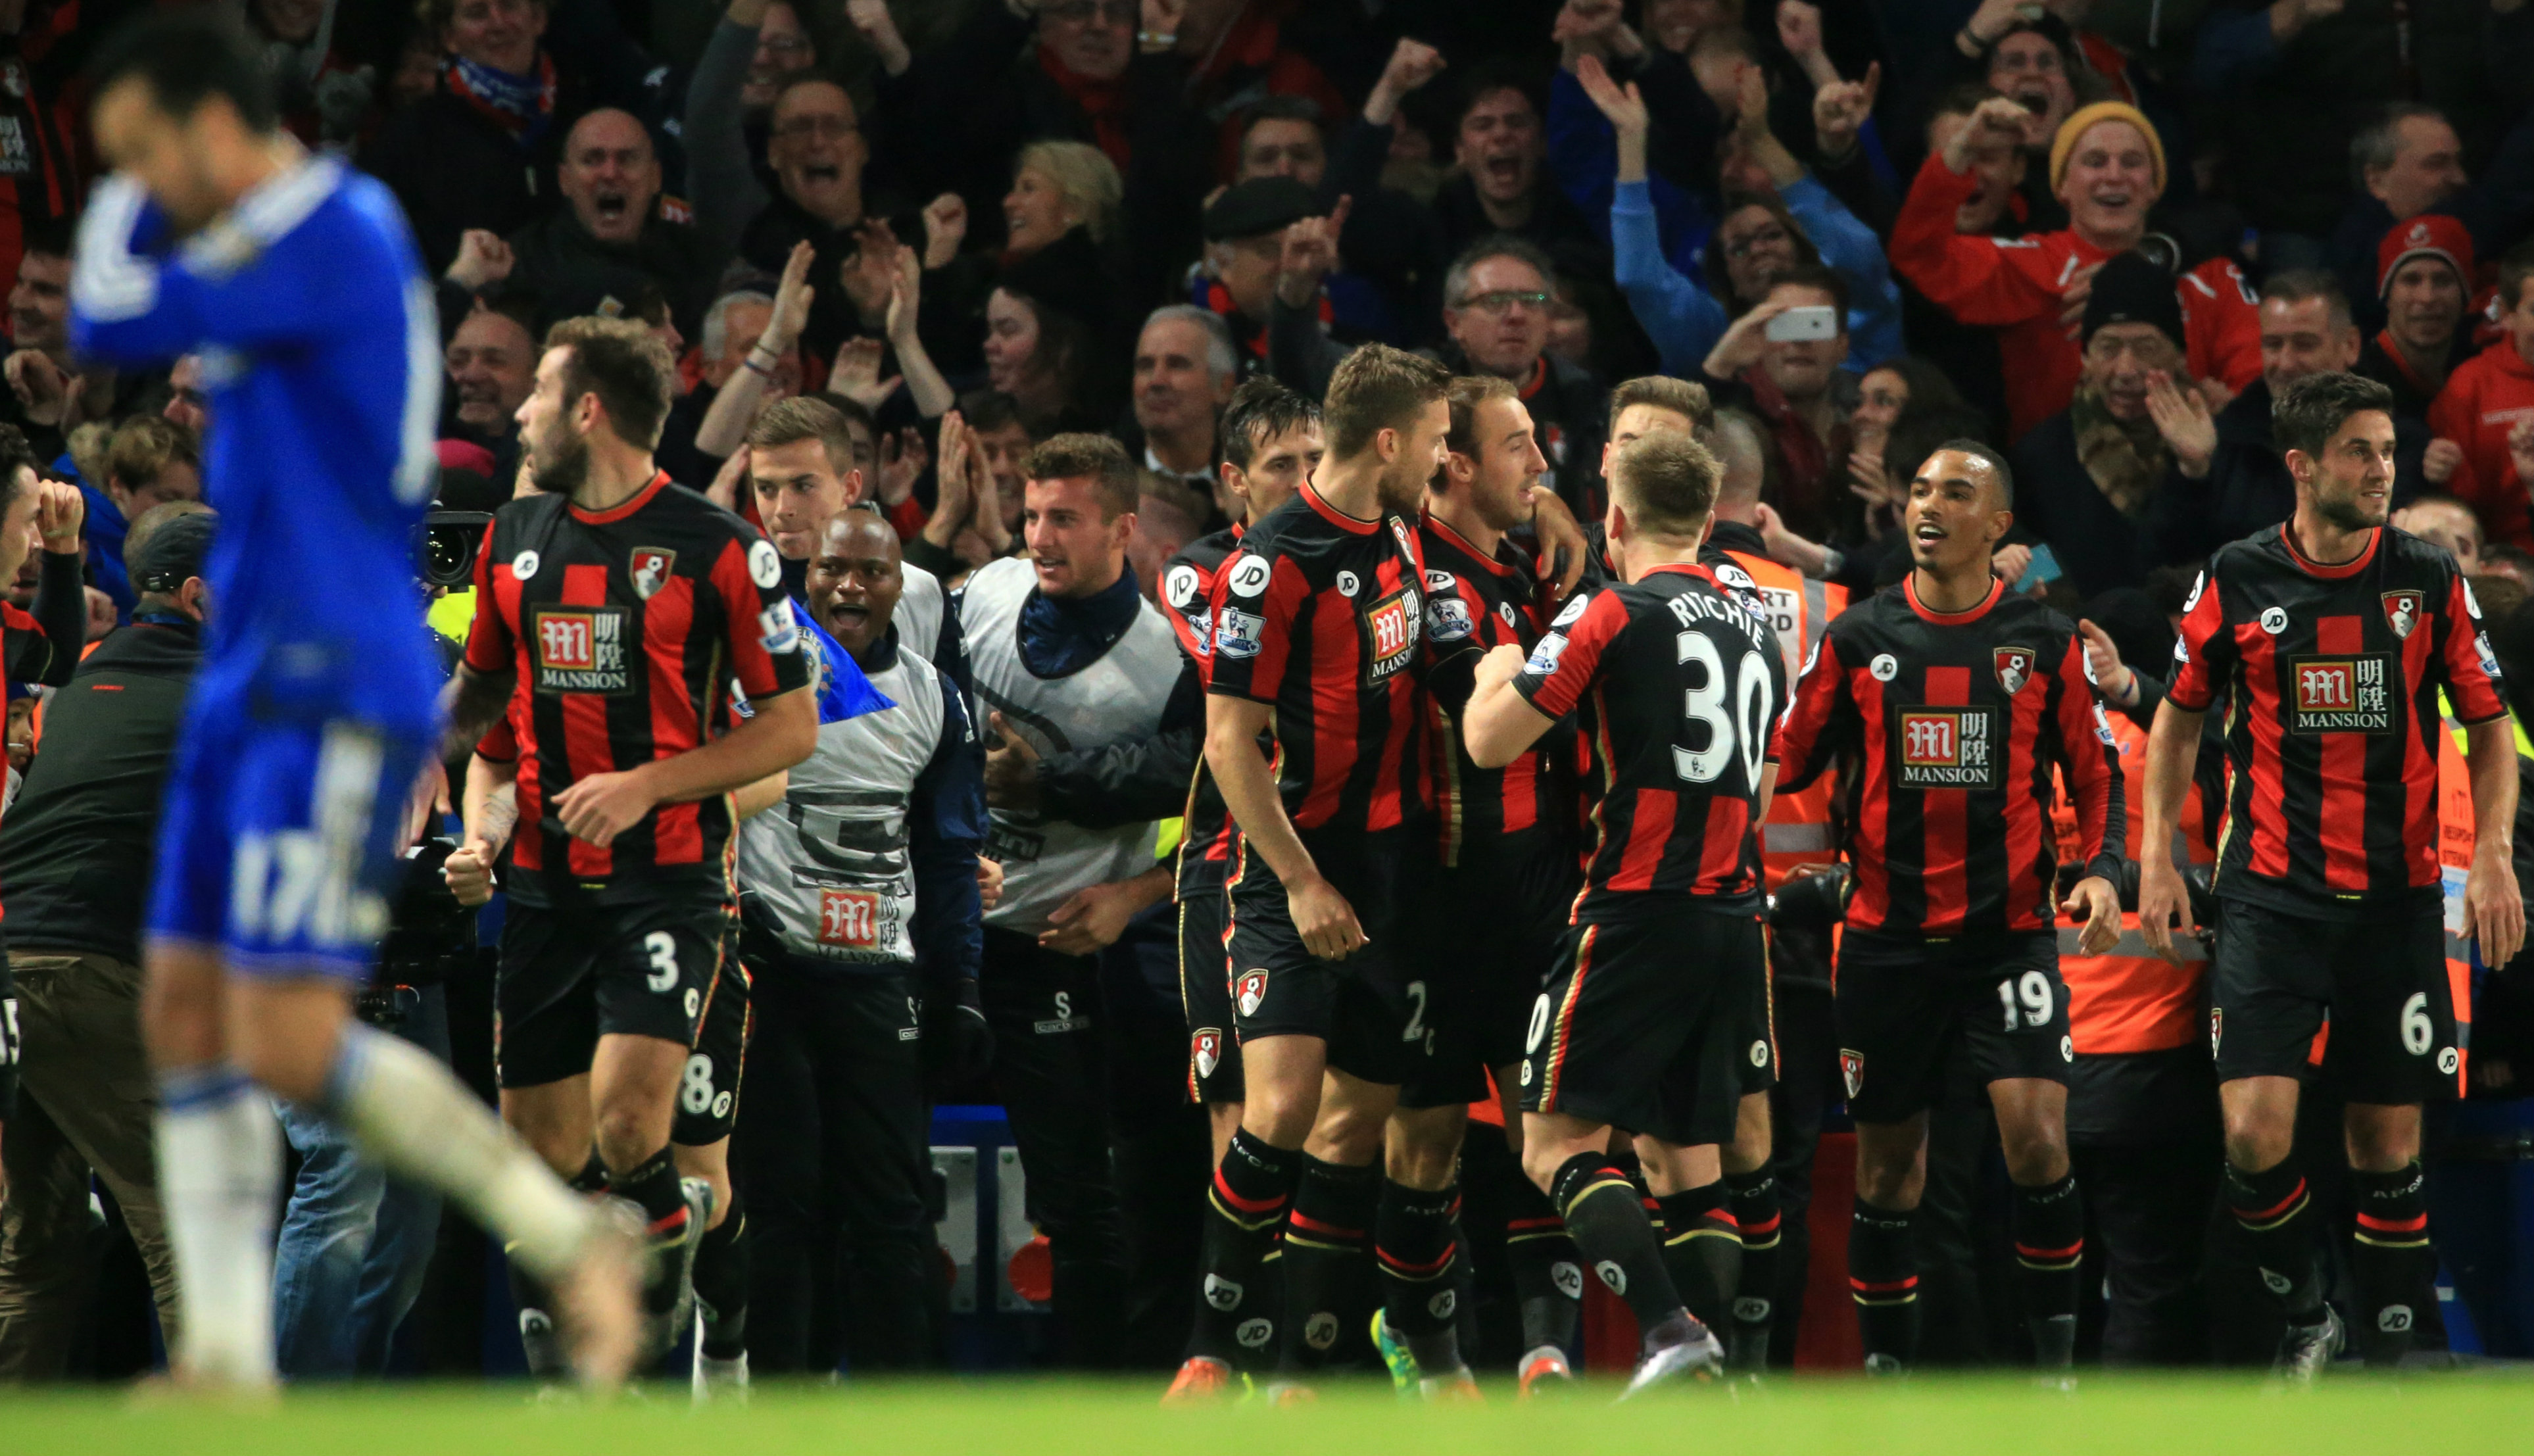 Bournemouth's win was another low point in Chelsea's season